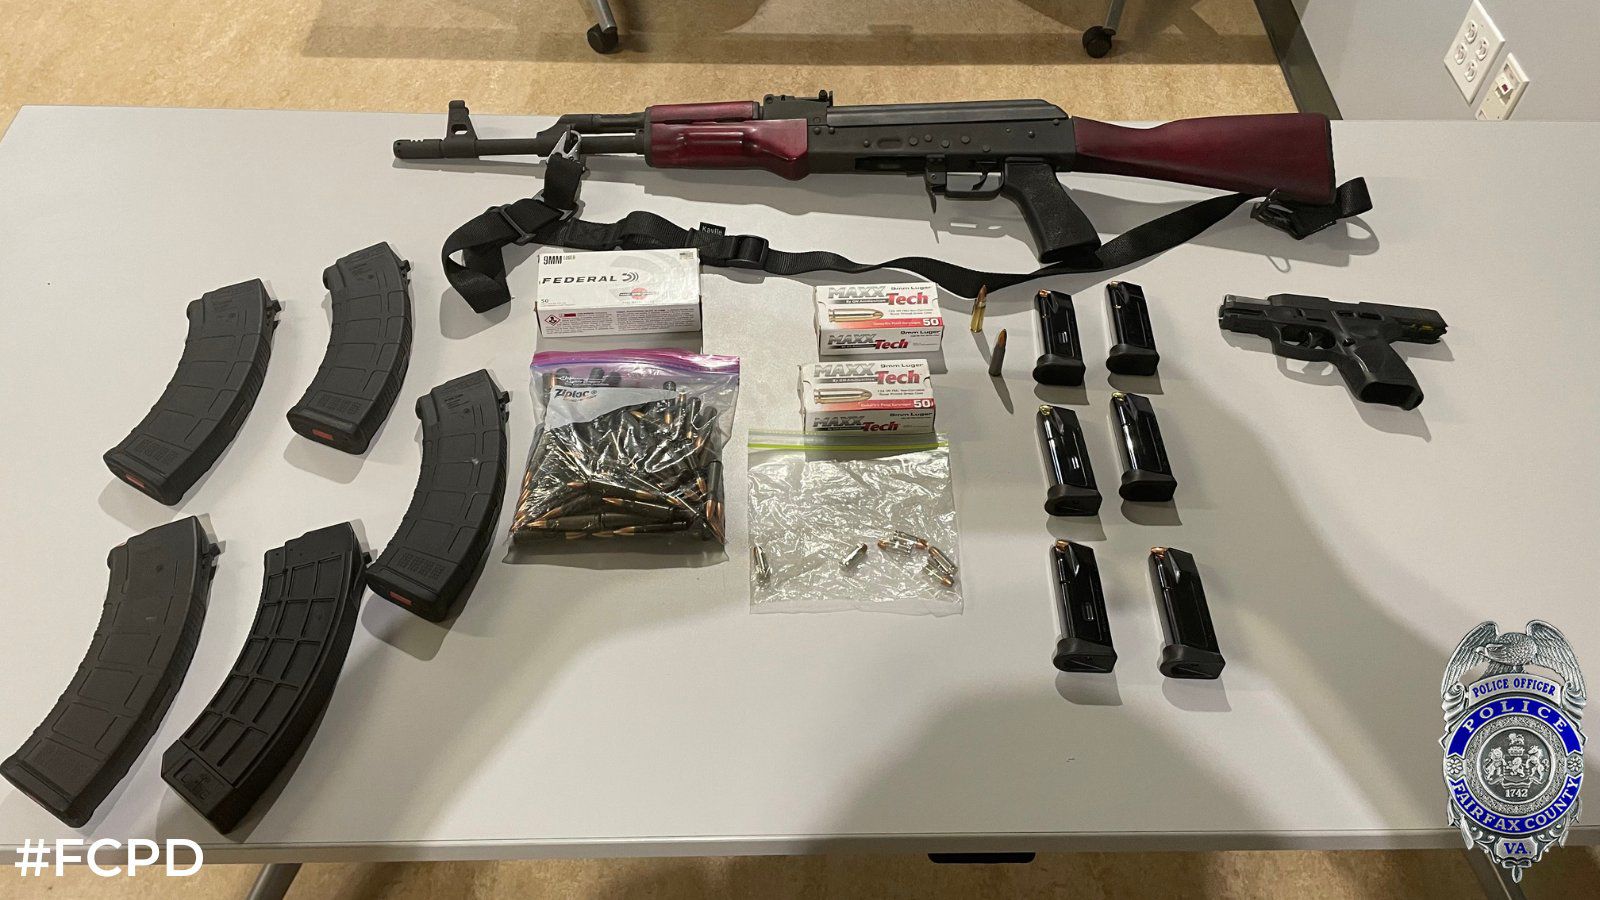 Fairfax County police say they recovered an AK-47 and another weapon after a man trespassed at a Virginia preschool. 